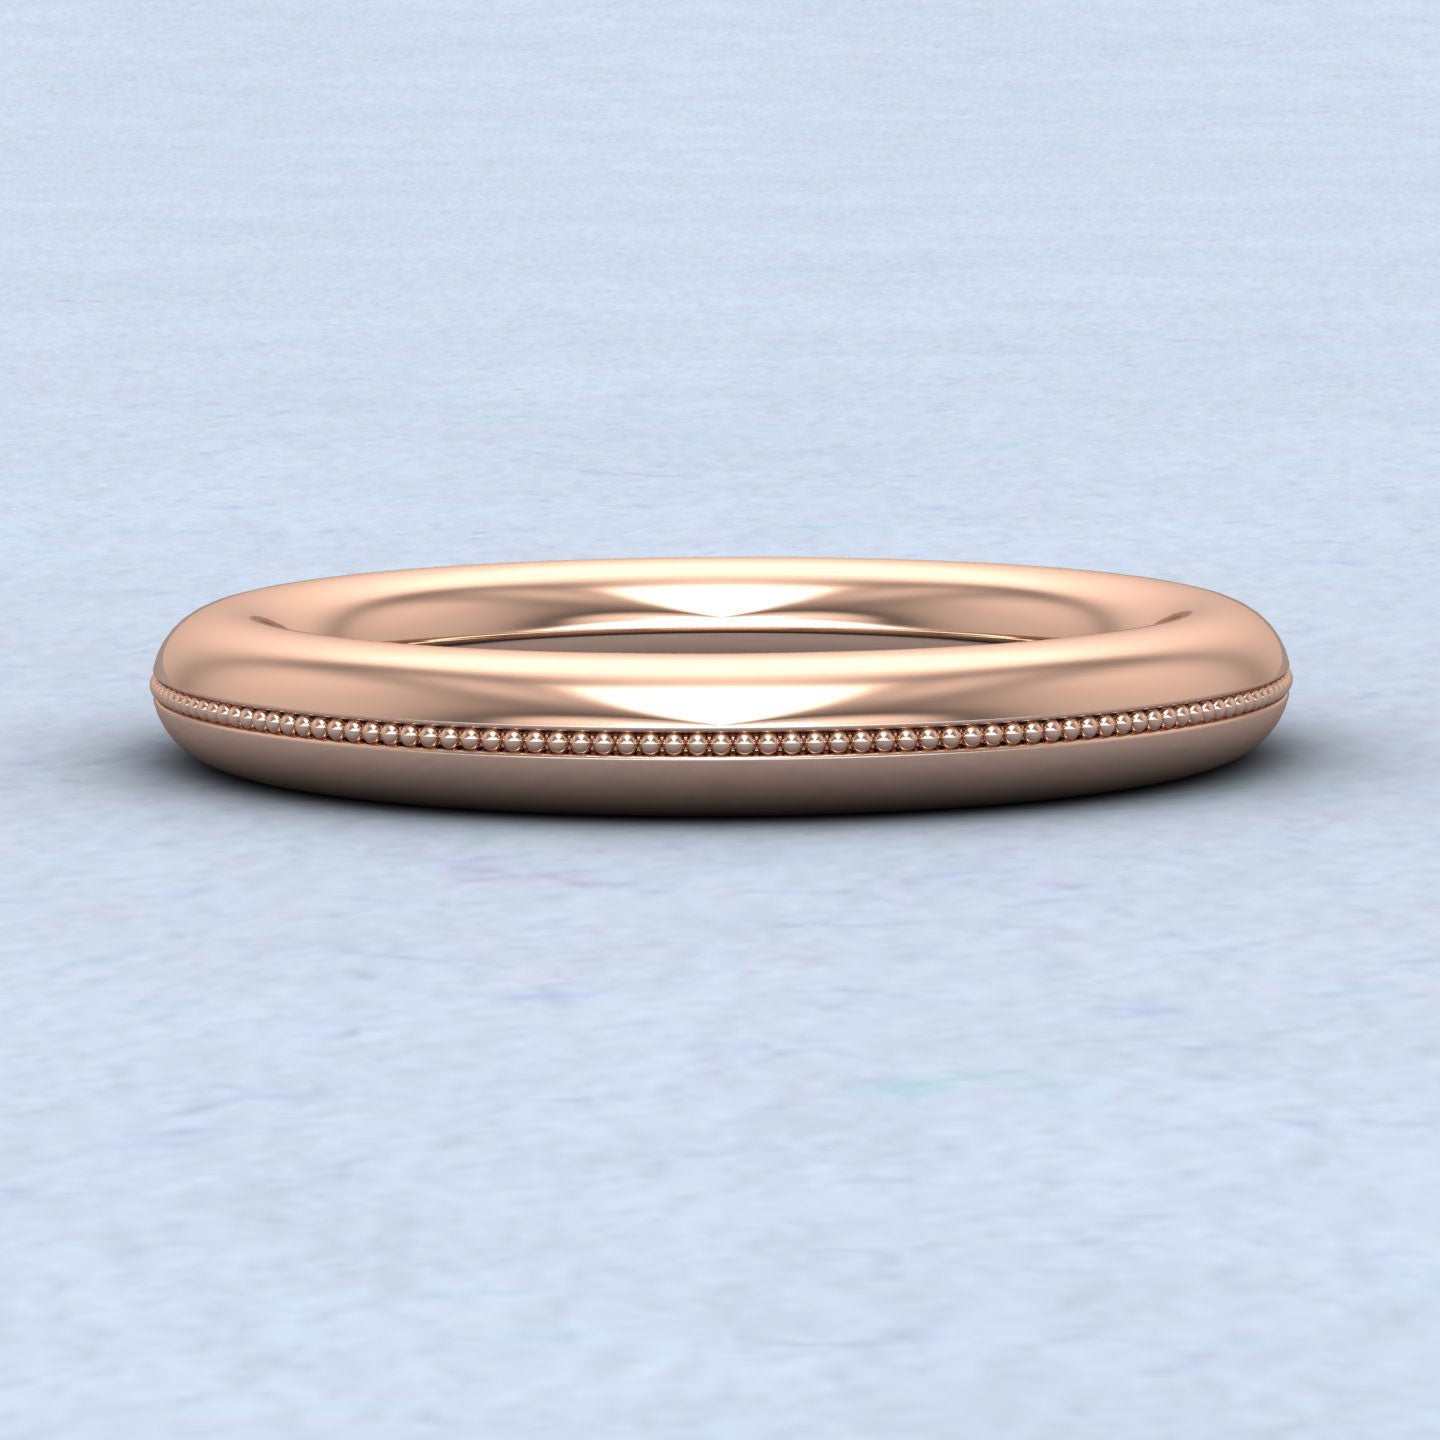 Millgrain Patterned 9ct Rose Gold 3mm Halo Wedding Ring